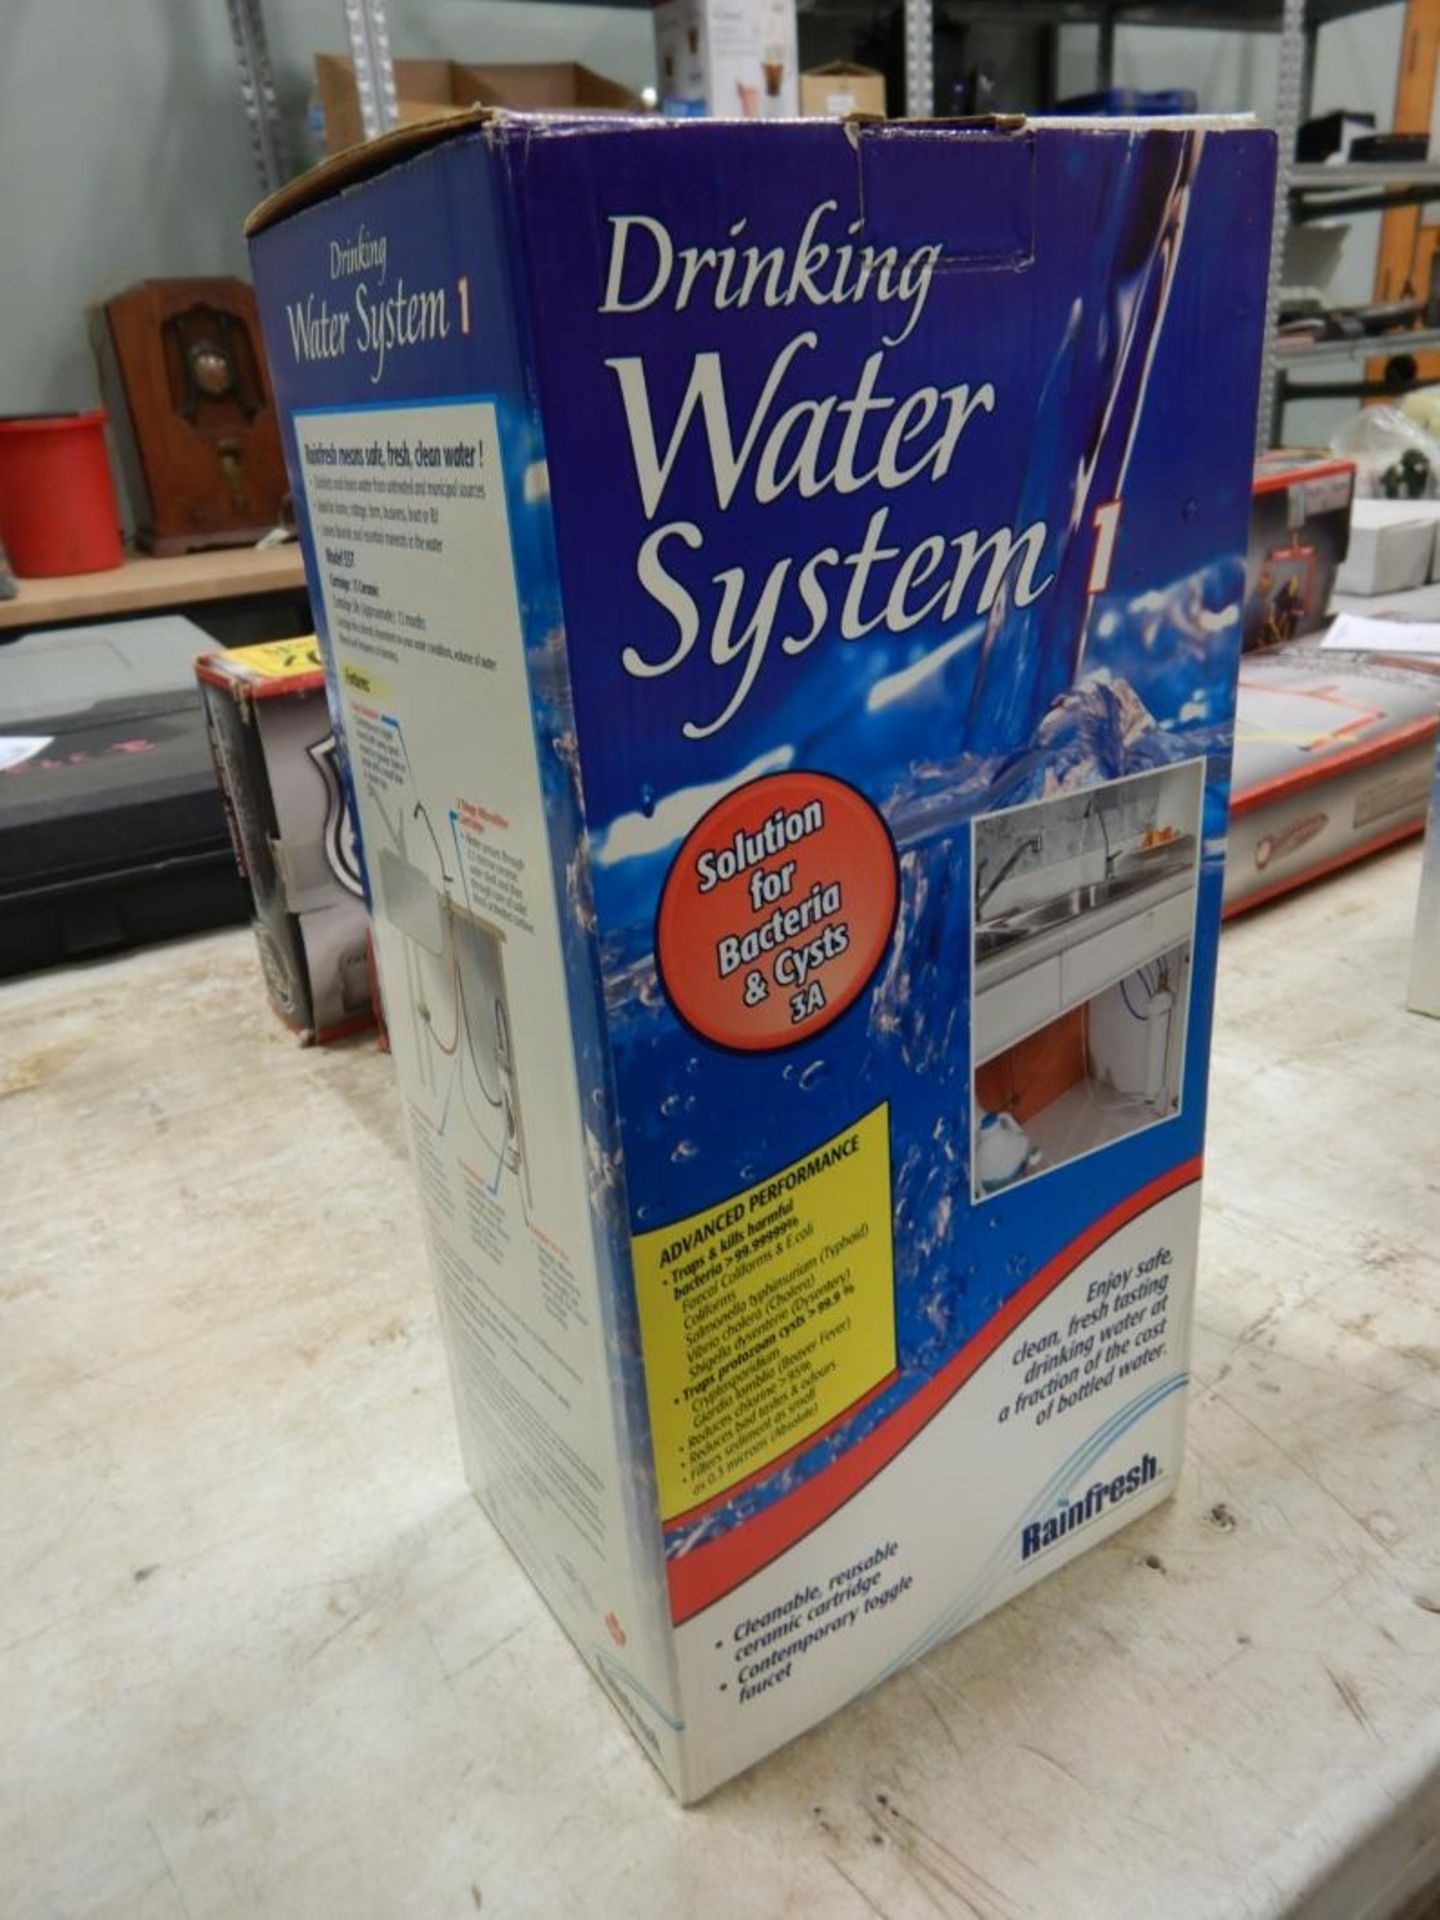 RAINFRESH DRINKING WATER SYSTEM (UN-USED - NEW IN BOX)